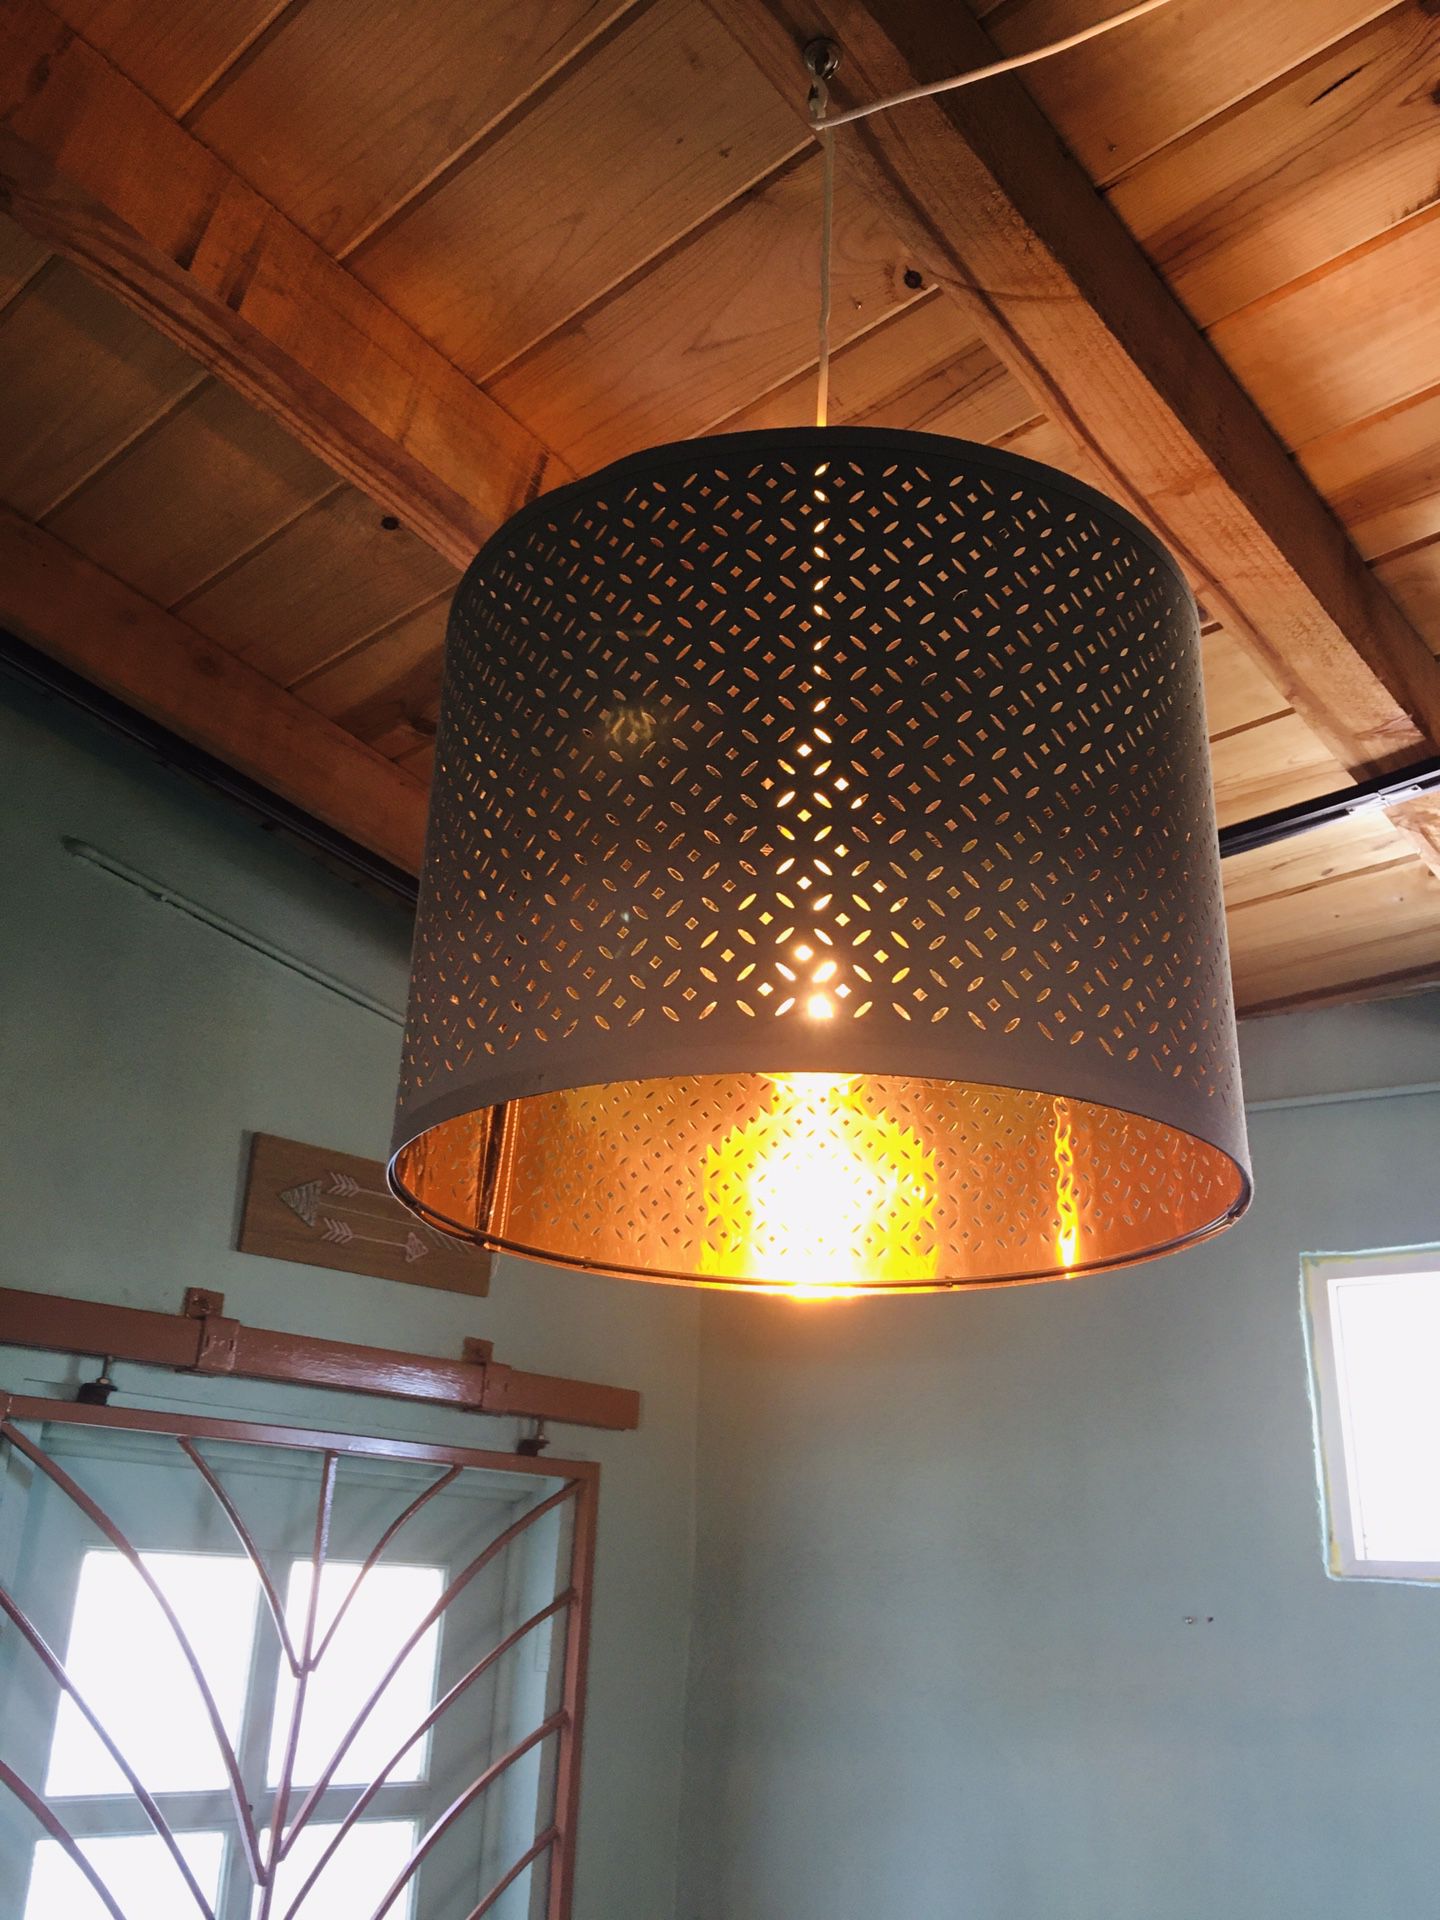 IKEA “Nymo” Lampshade! Teal/Brass Color